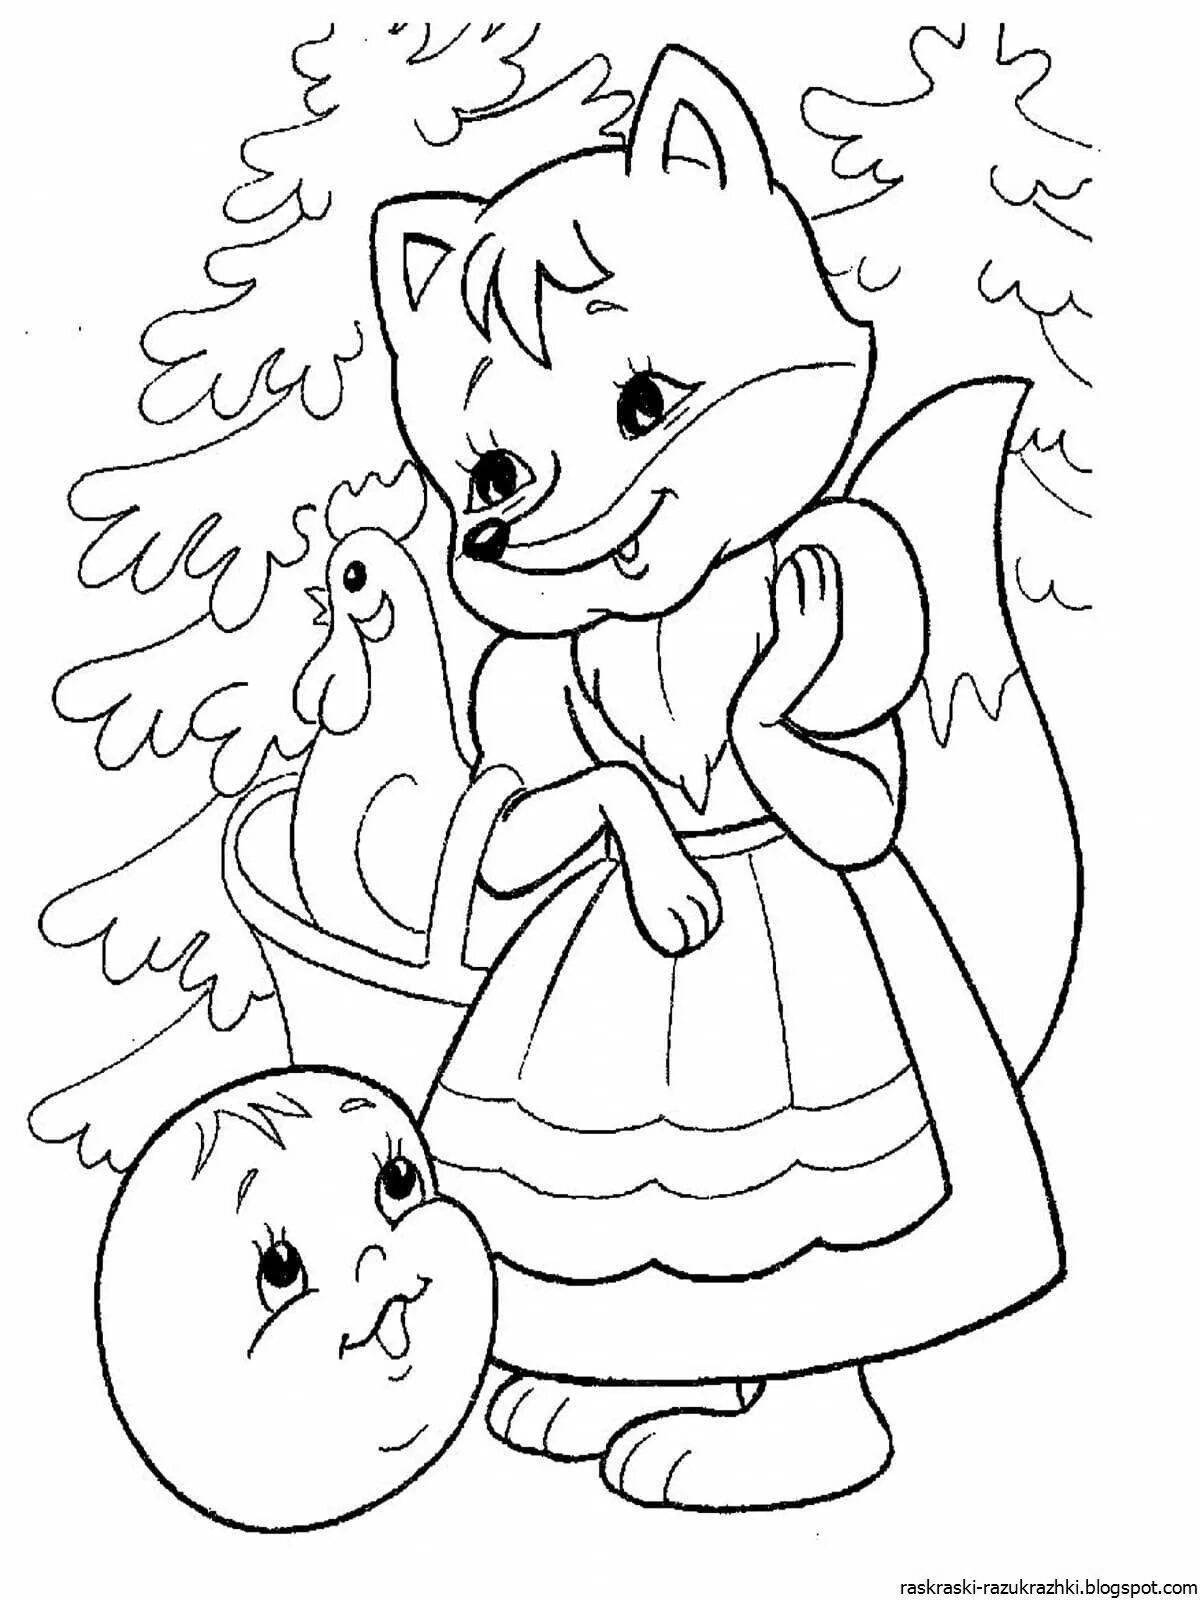 Wonderful coloring book heroes of fairy tales for 6 7 years